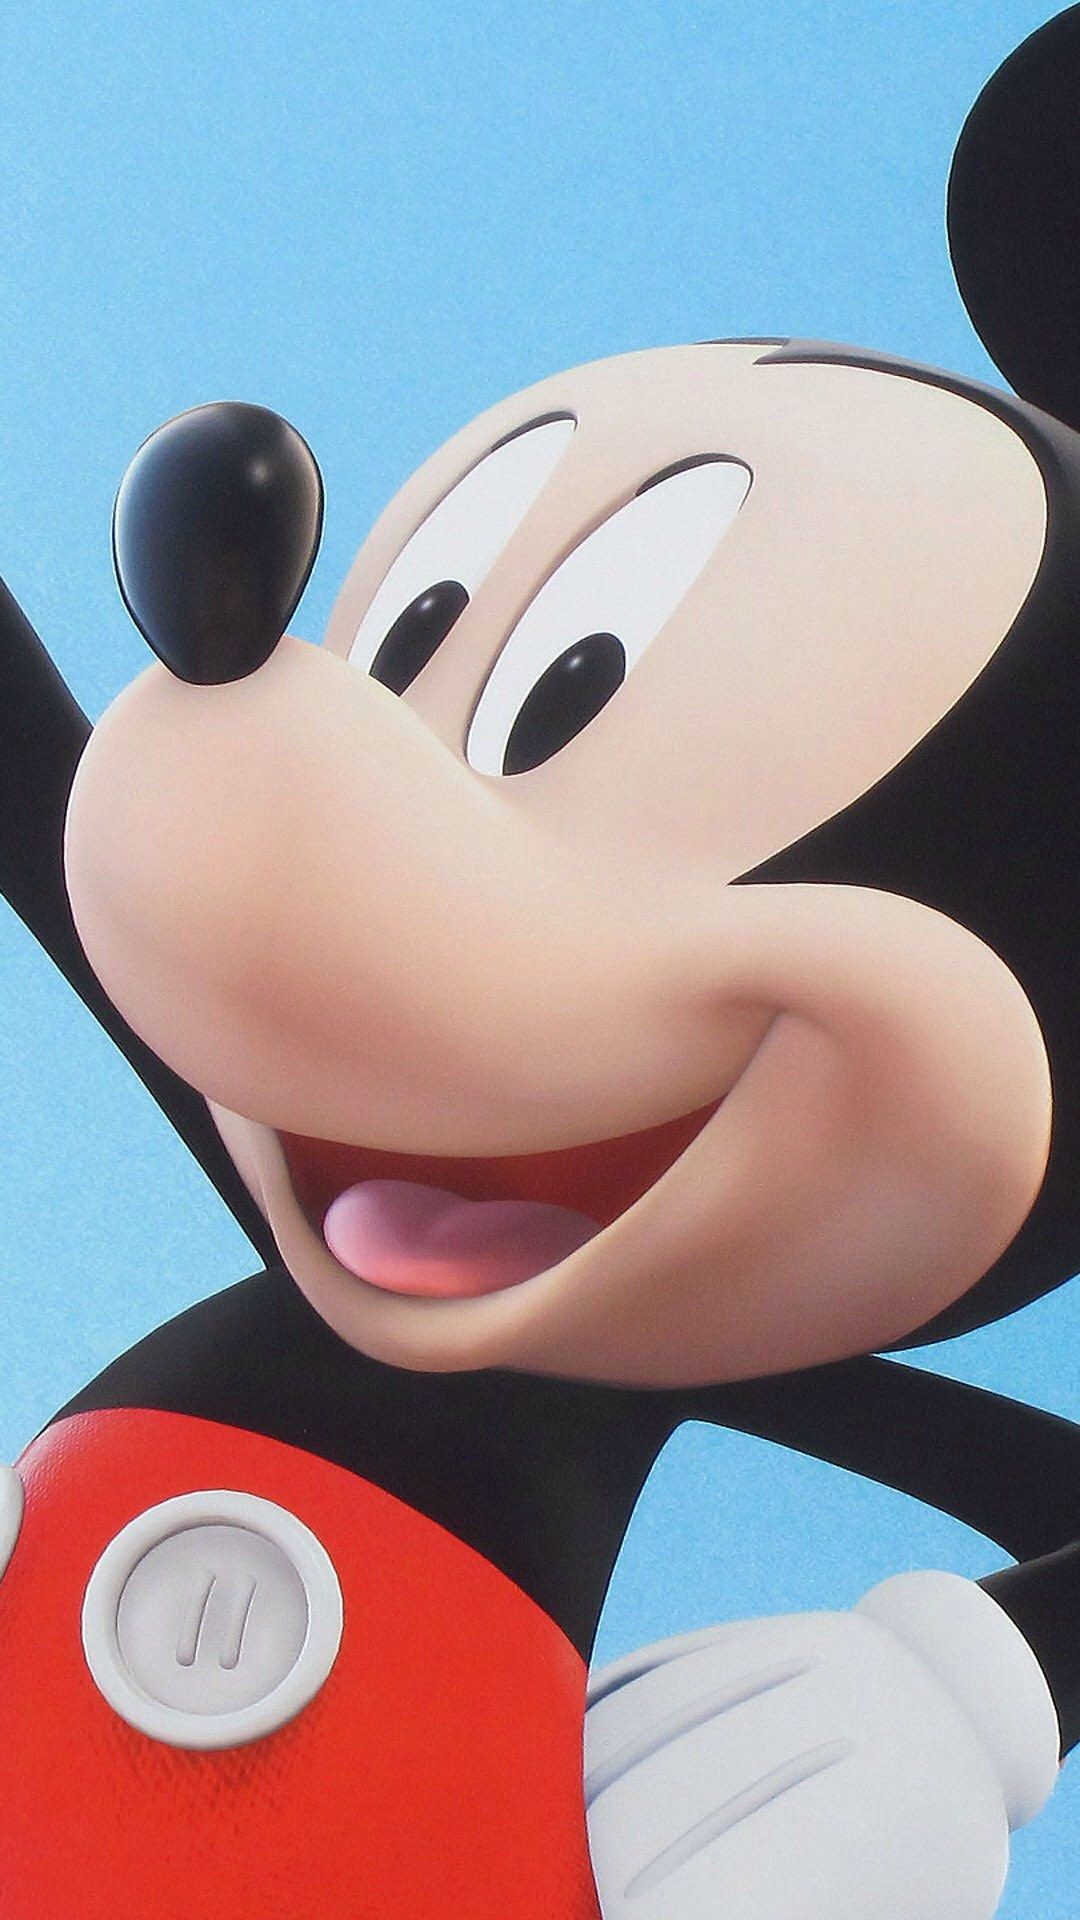 Mickey Mouse iPhone wallpaper